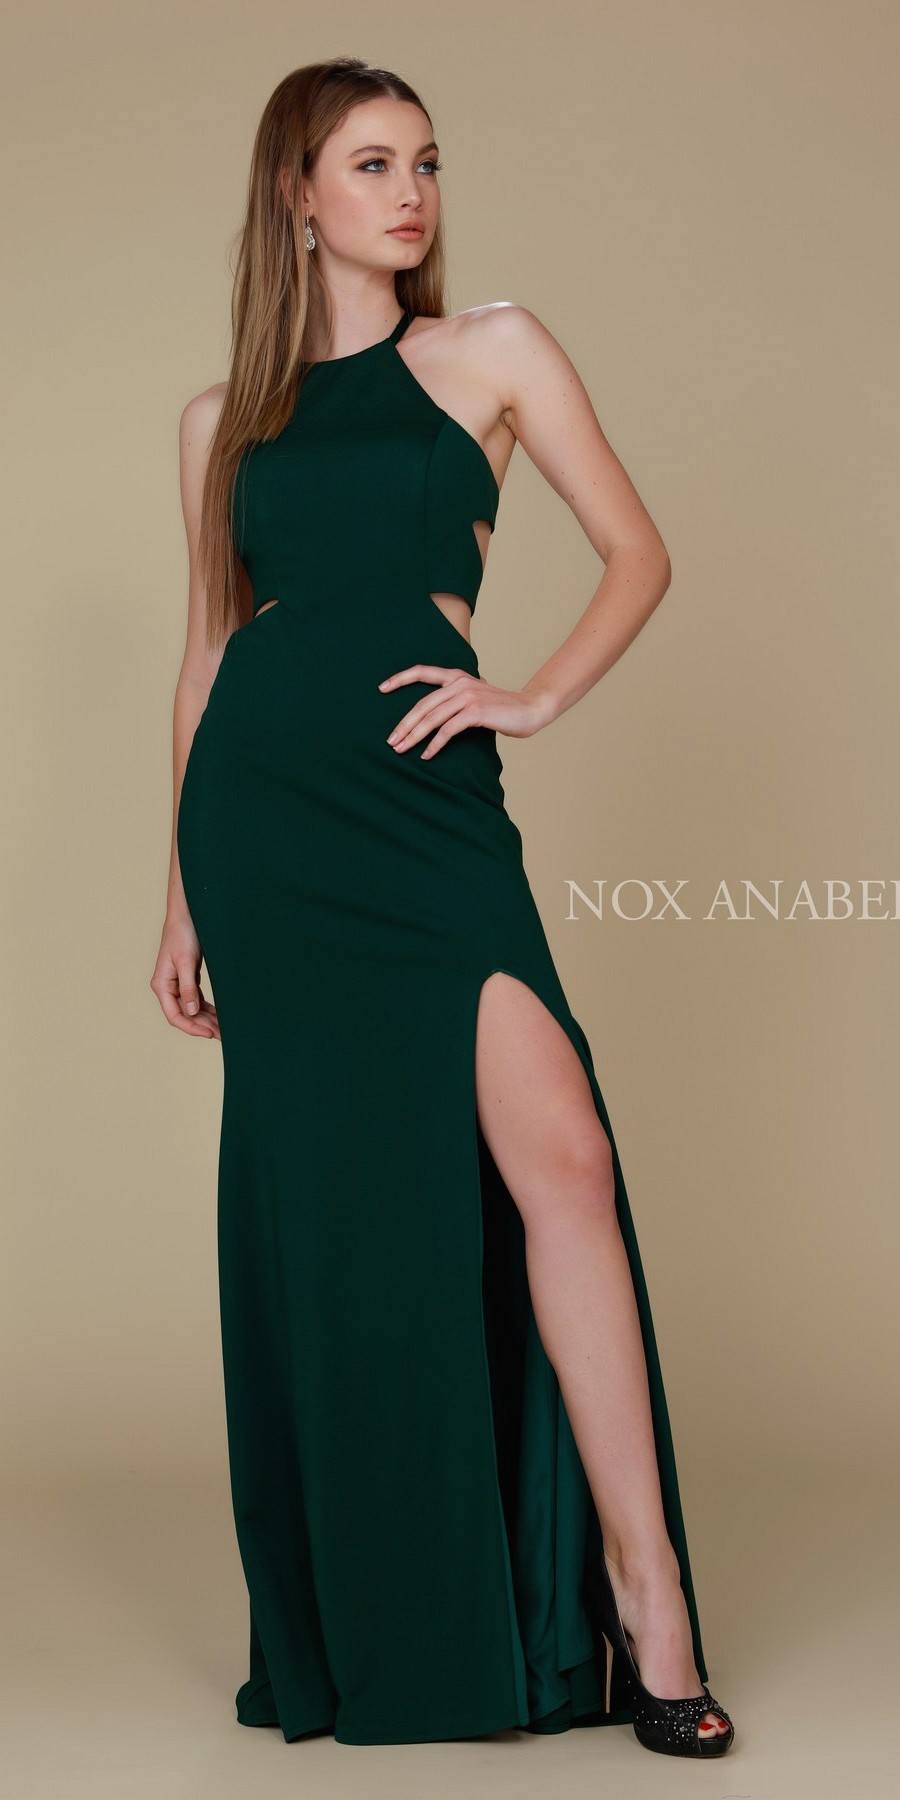 Hunter Green Halter Cut Out Long Prom Dress Strappy Back with Slit